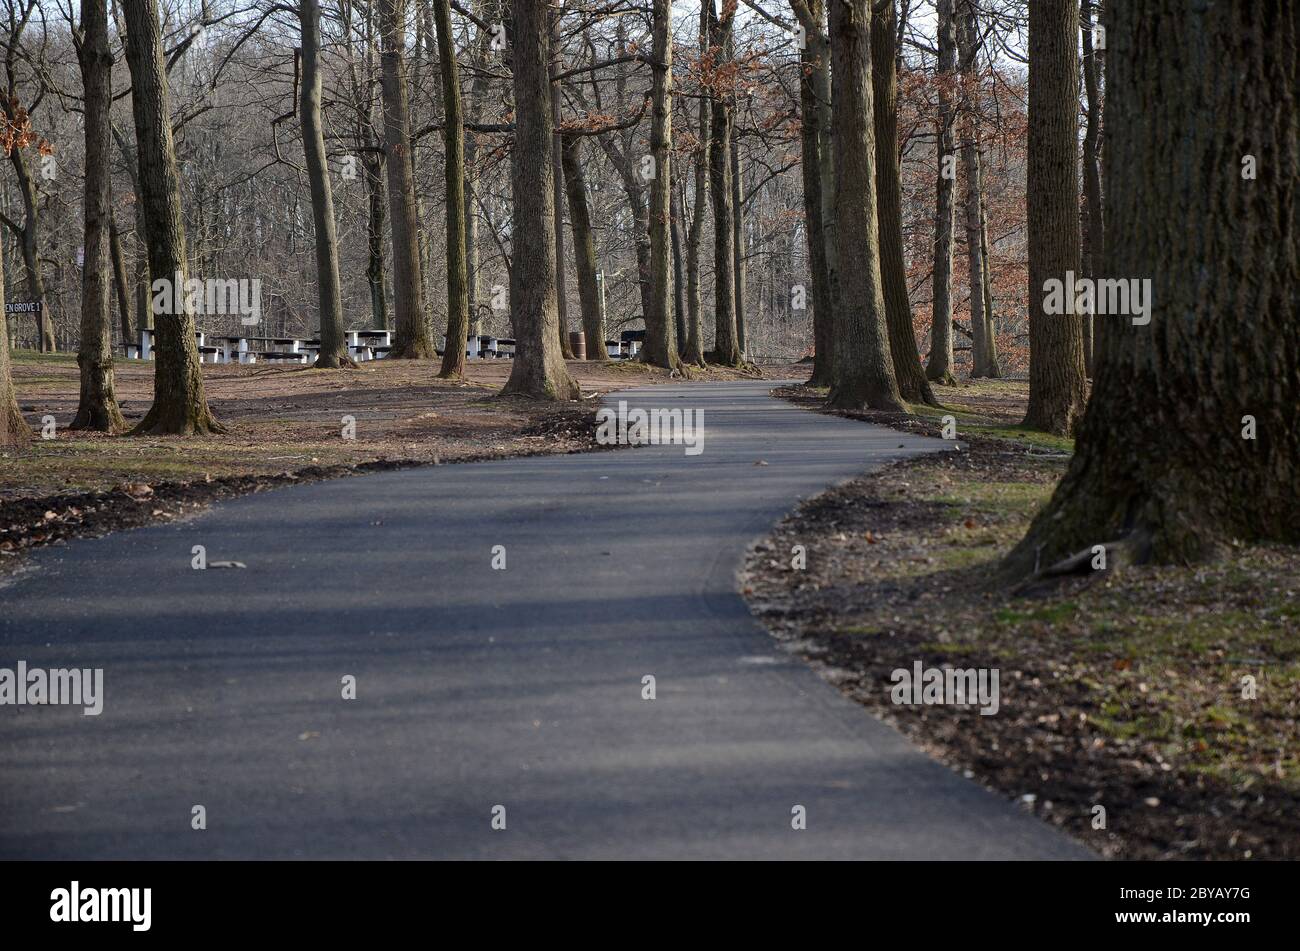 ROOTS: A public park is left with the just the bare branches of trees in the fall and winter months. Stock Photo